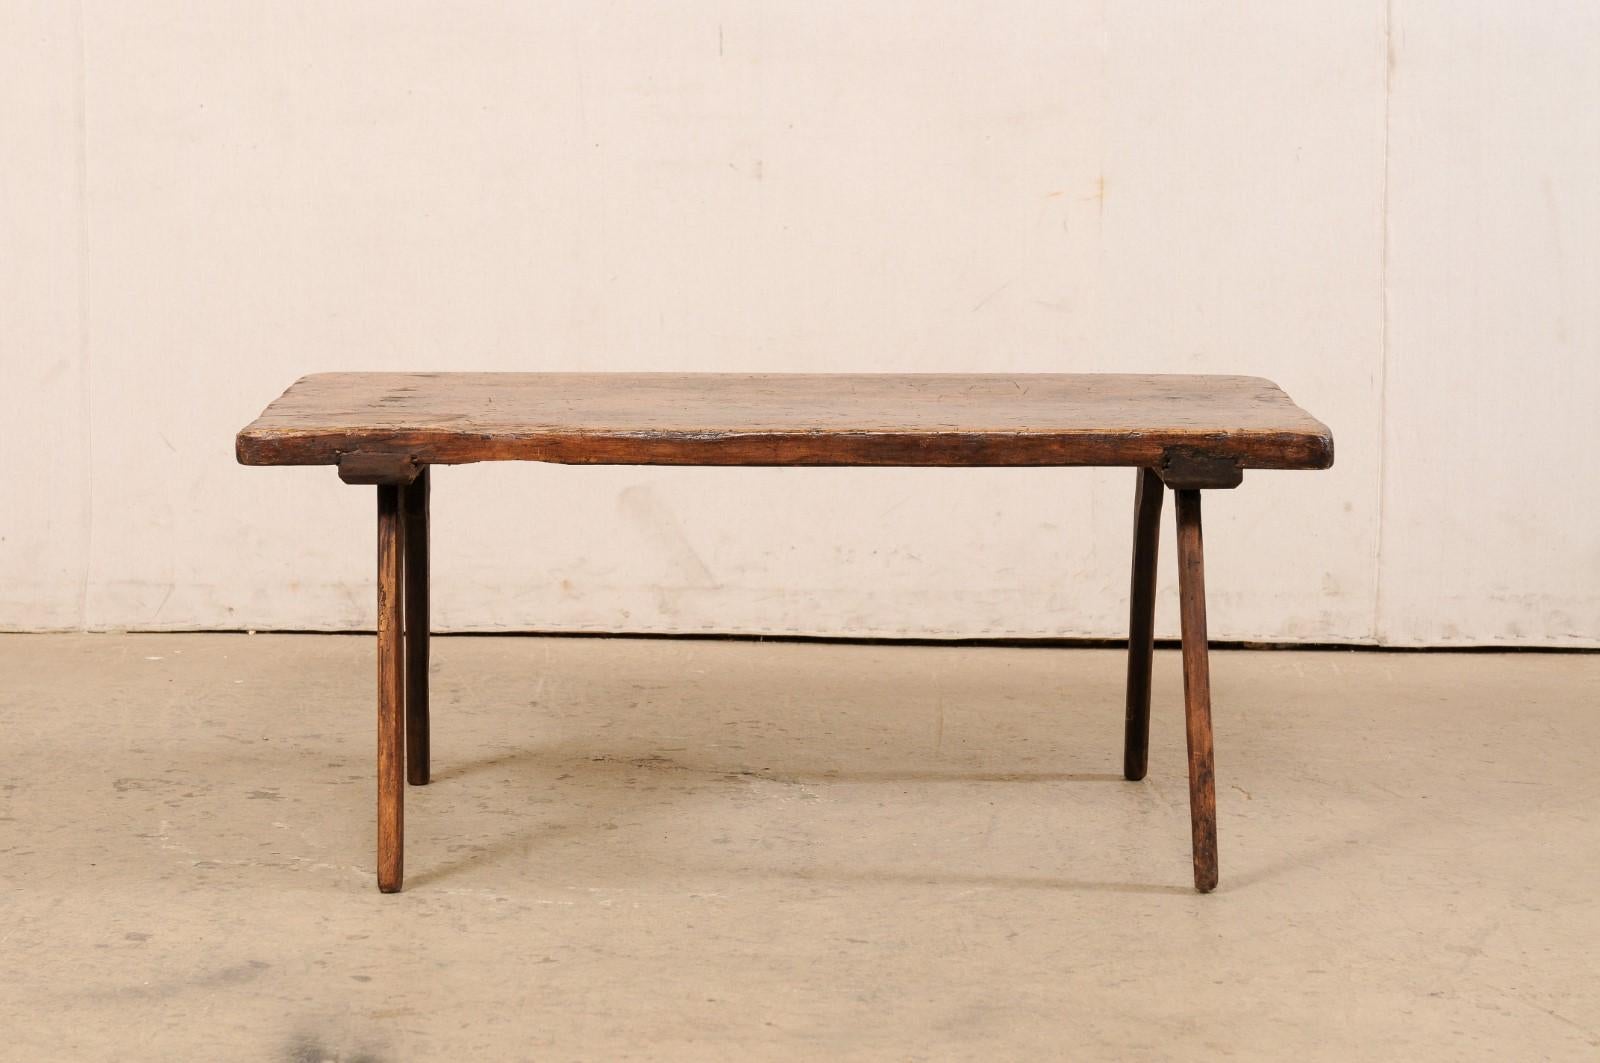 Spanish Rustic Wood Rectangular-Shaped Single Board Top Coffee Table, 19th C. For Sale 2